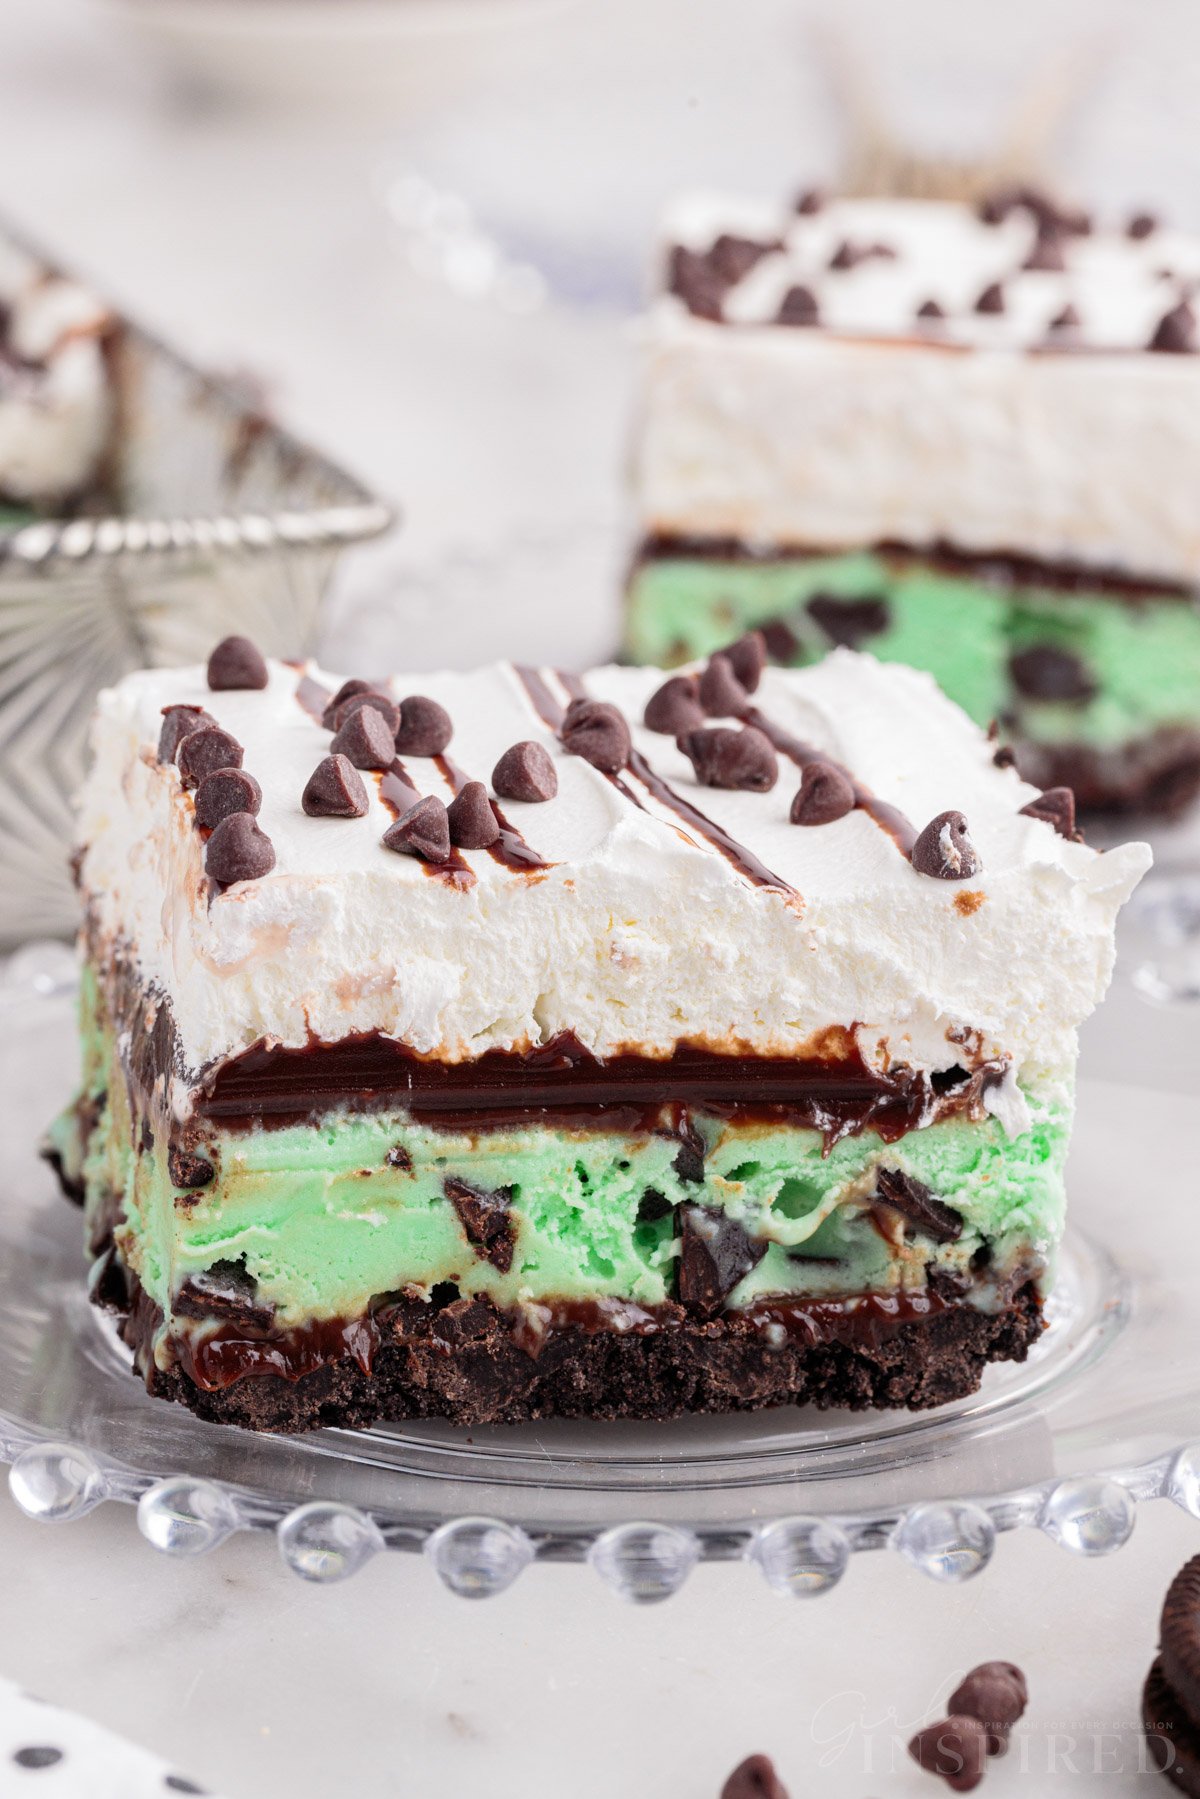 Slice of mint chocolate chip ice cream cake on a glass plate.